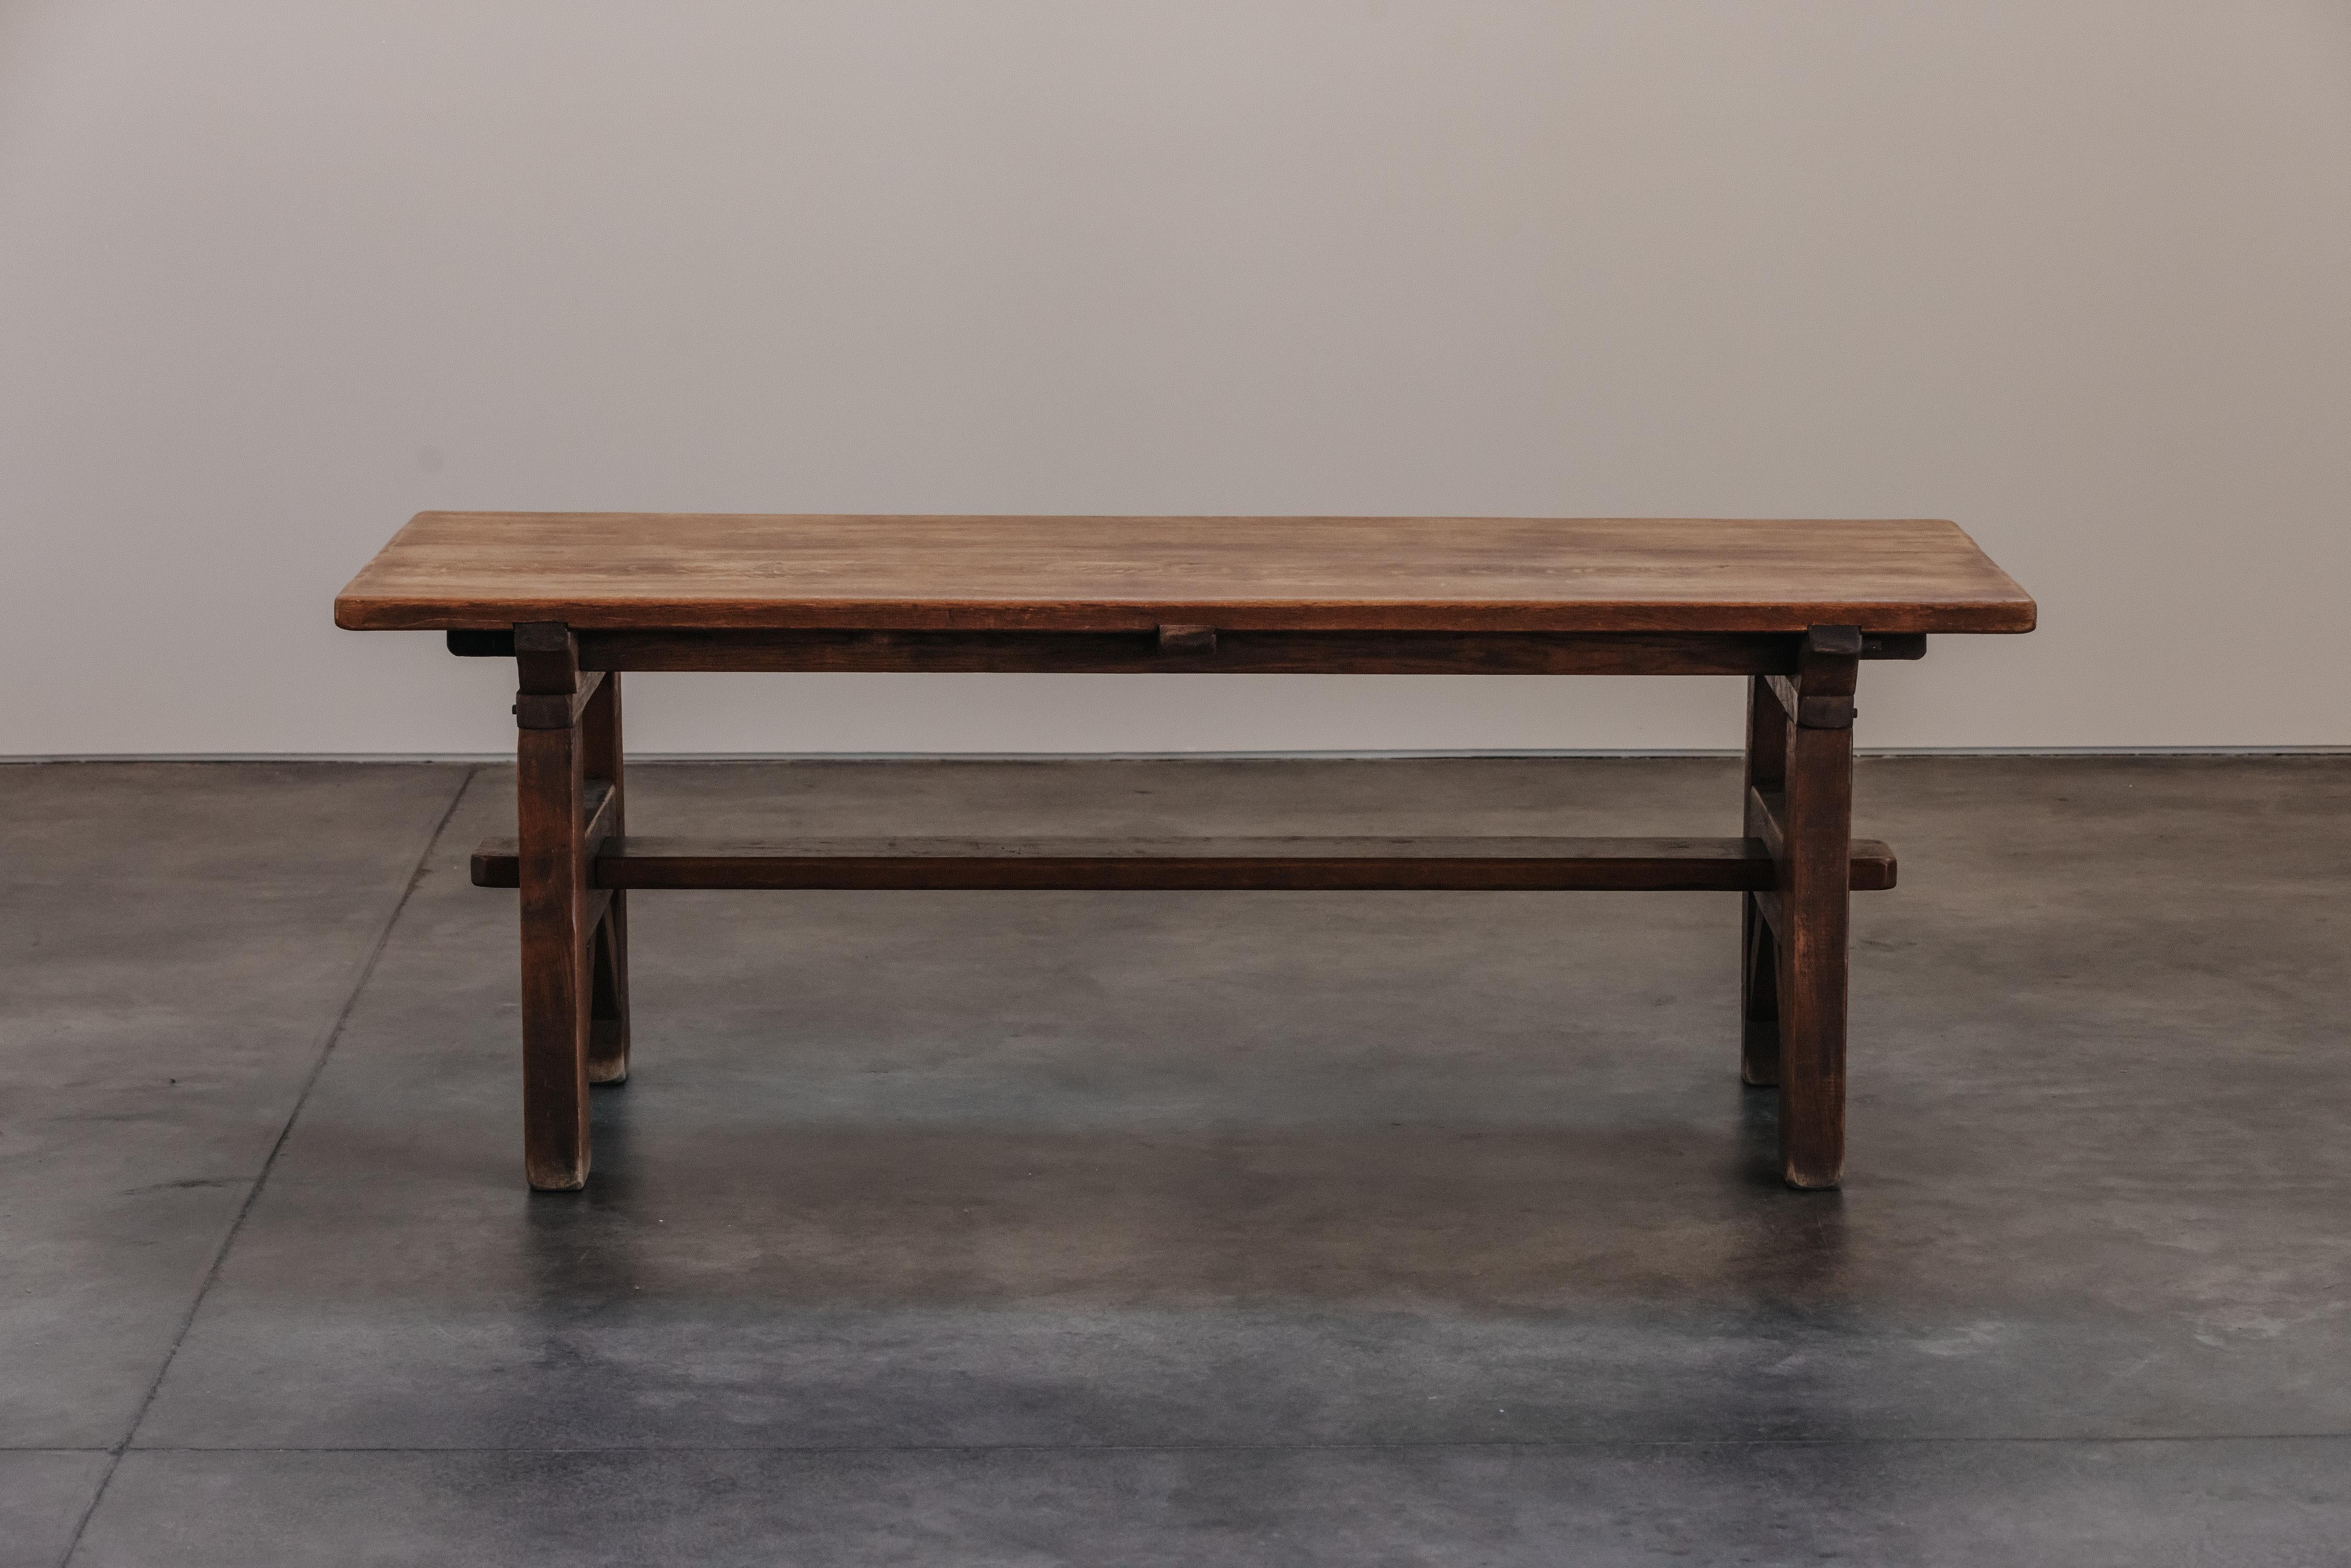 Vintage Architect Dining Table From France, Circa 1960.  Solid oak construction with light wear and use.